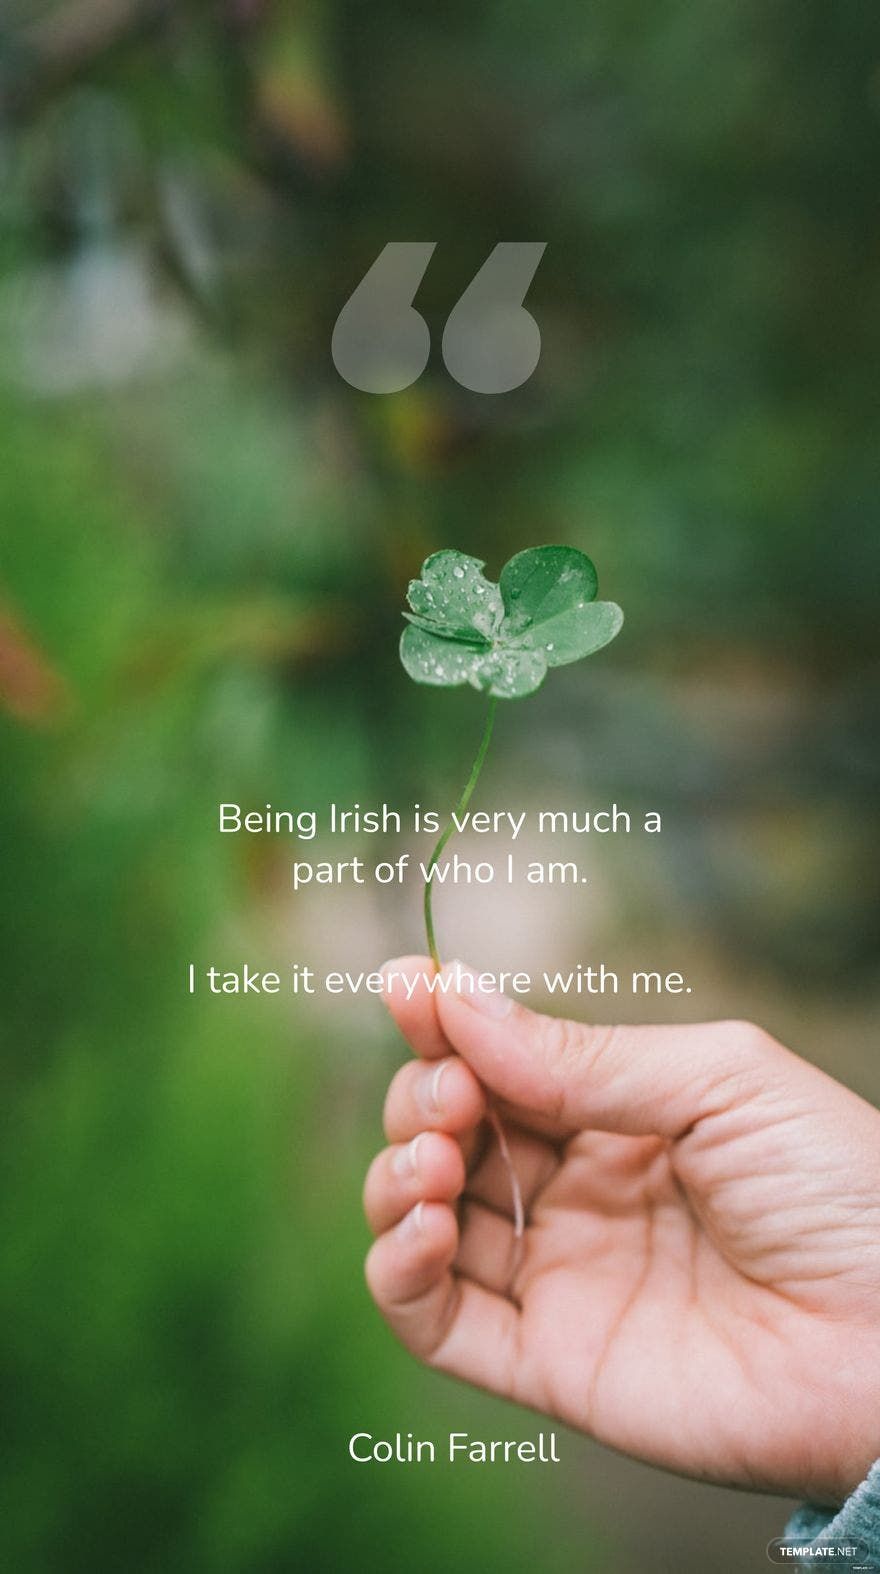 Colin Farrell - Being Irish is very much a part of who I am. I take it everywhere with me. in JPEG